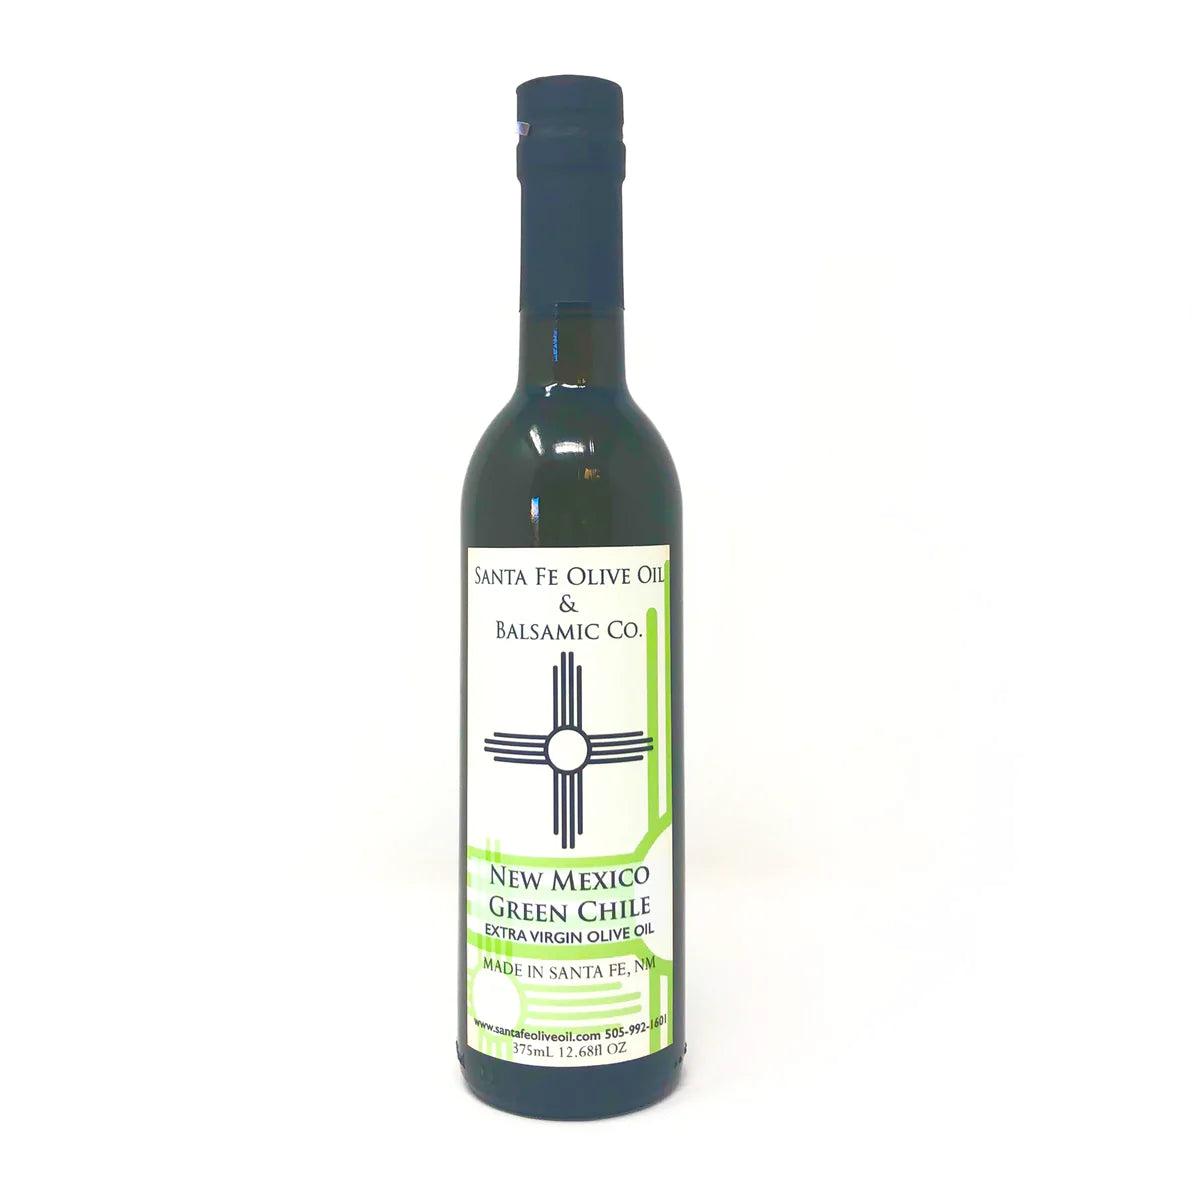 New Mexico Green Chile Olive Oil